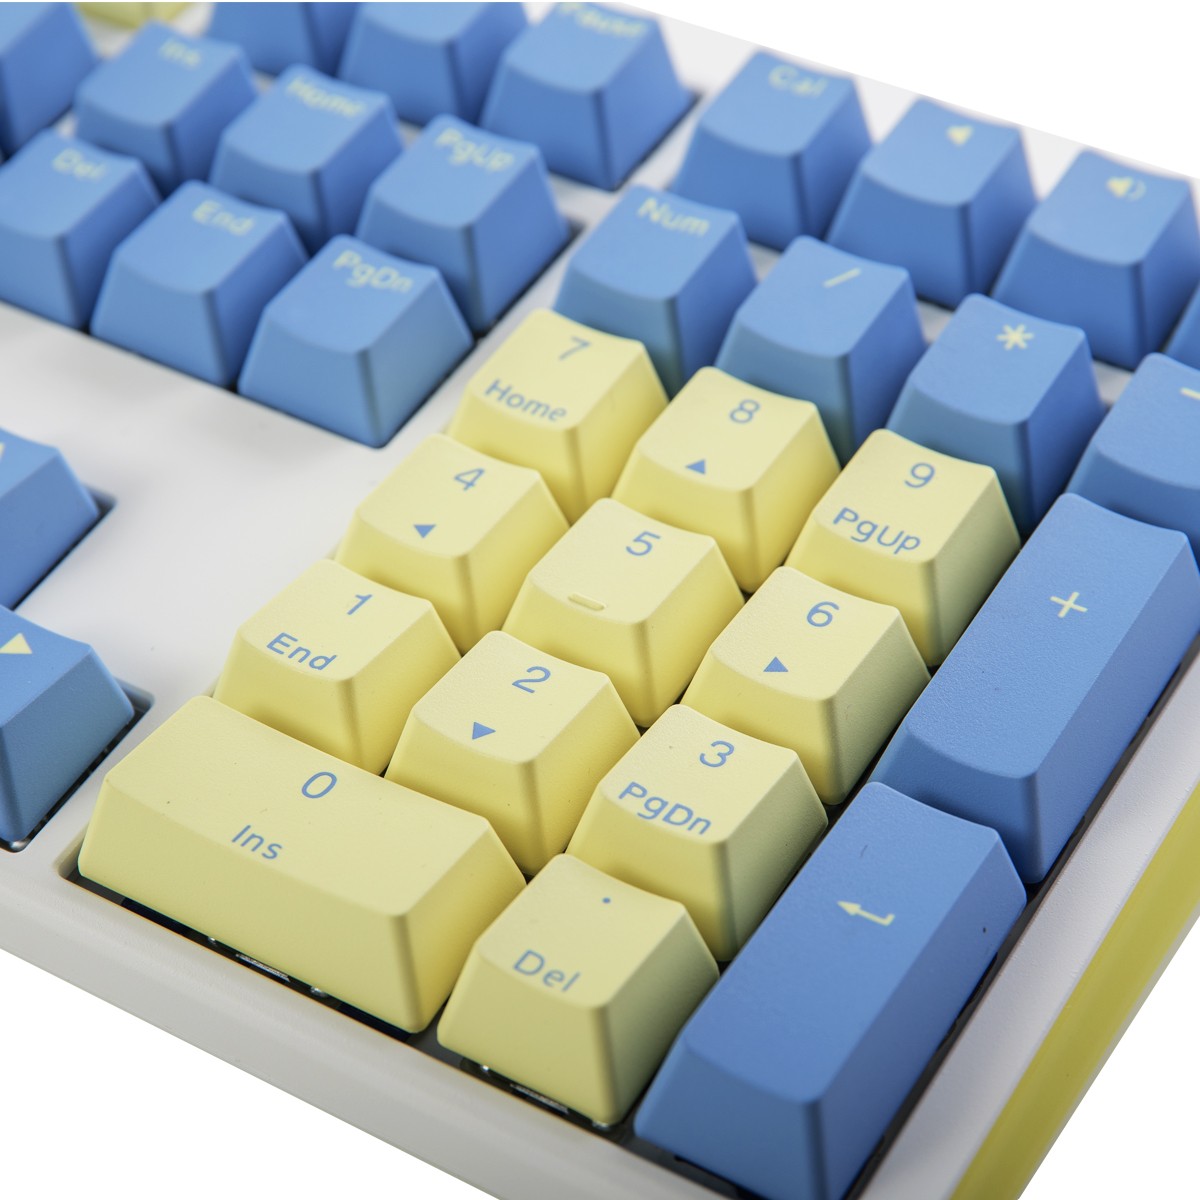 Ducky - Ducky x Fallout One 3 RGB LE Cherry Blue Switch Mechanical Gaming Keyboard UK Layout